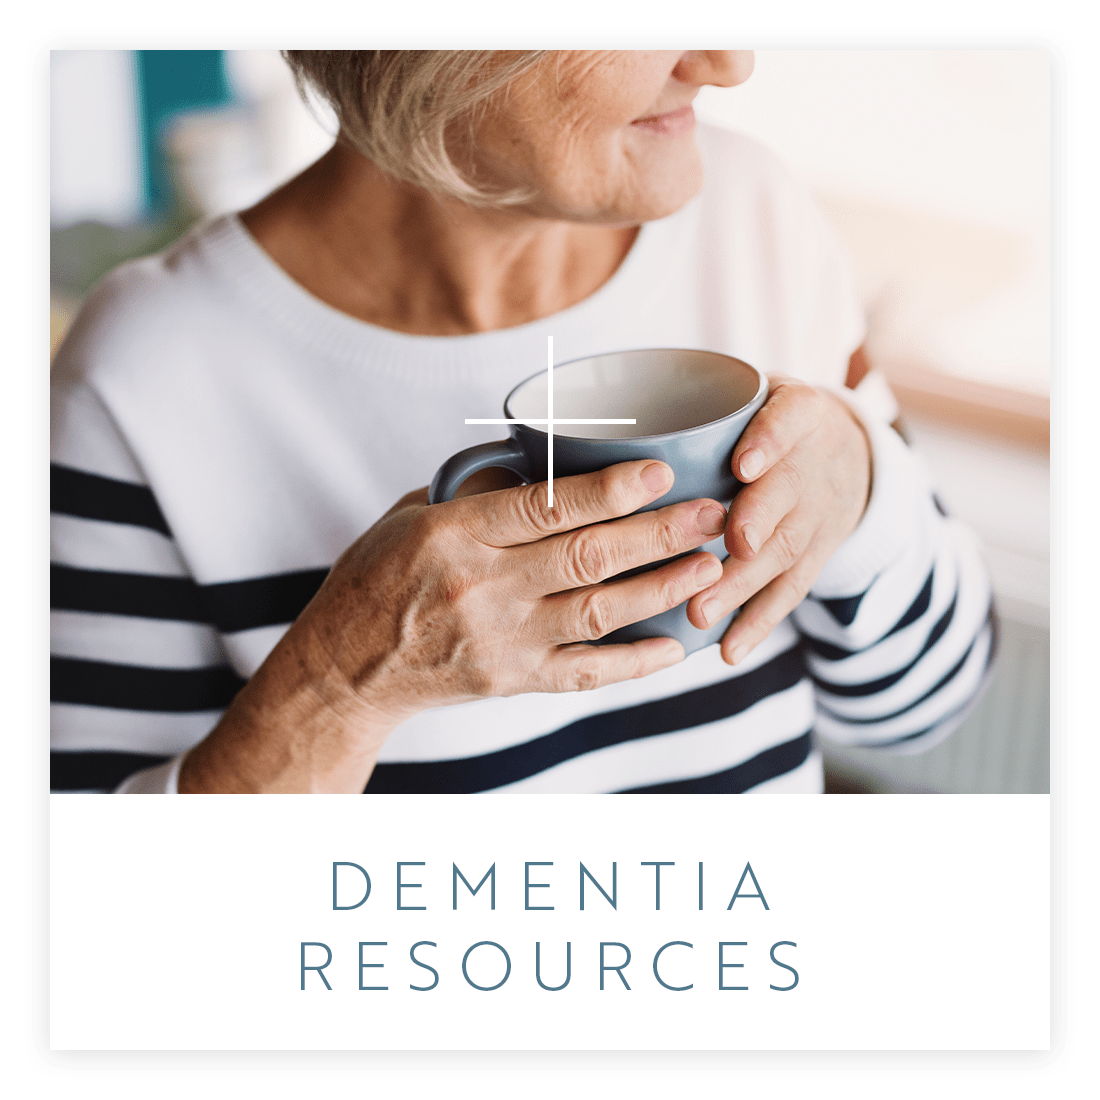 Learn about Dementia Resources at Regency Palms Long Beach in Long Beach, California